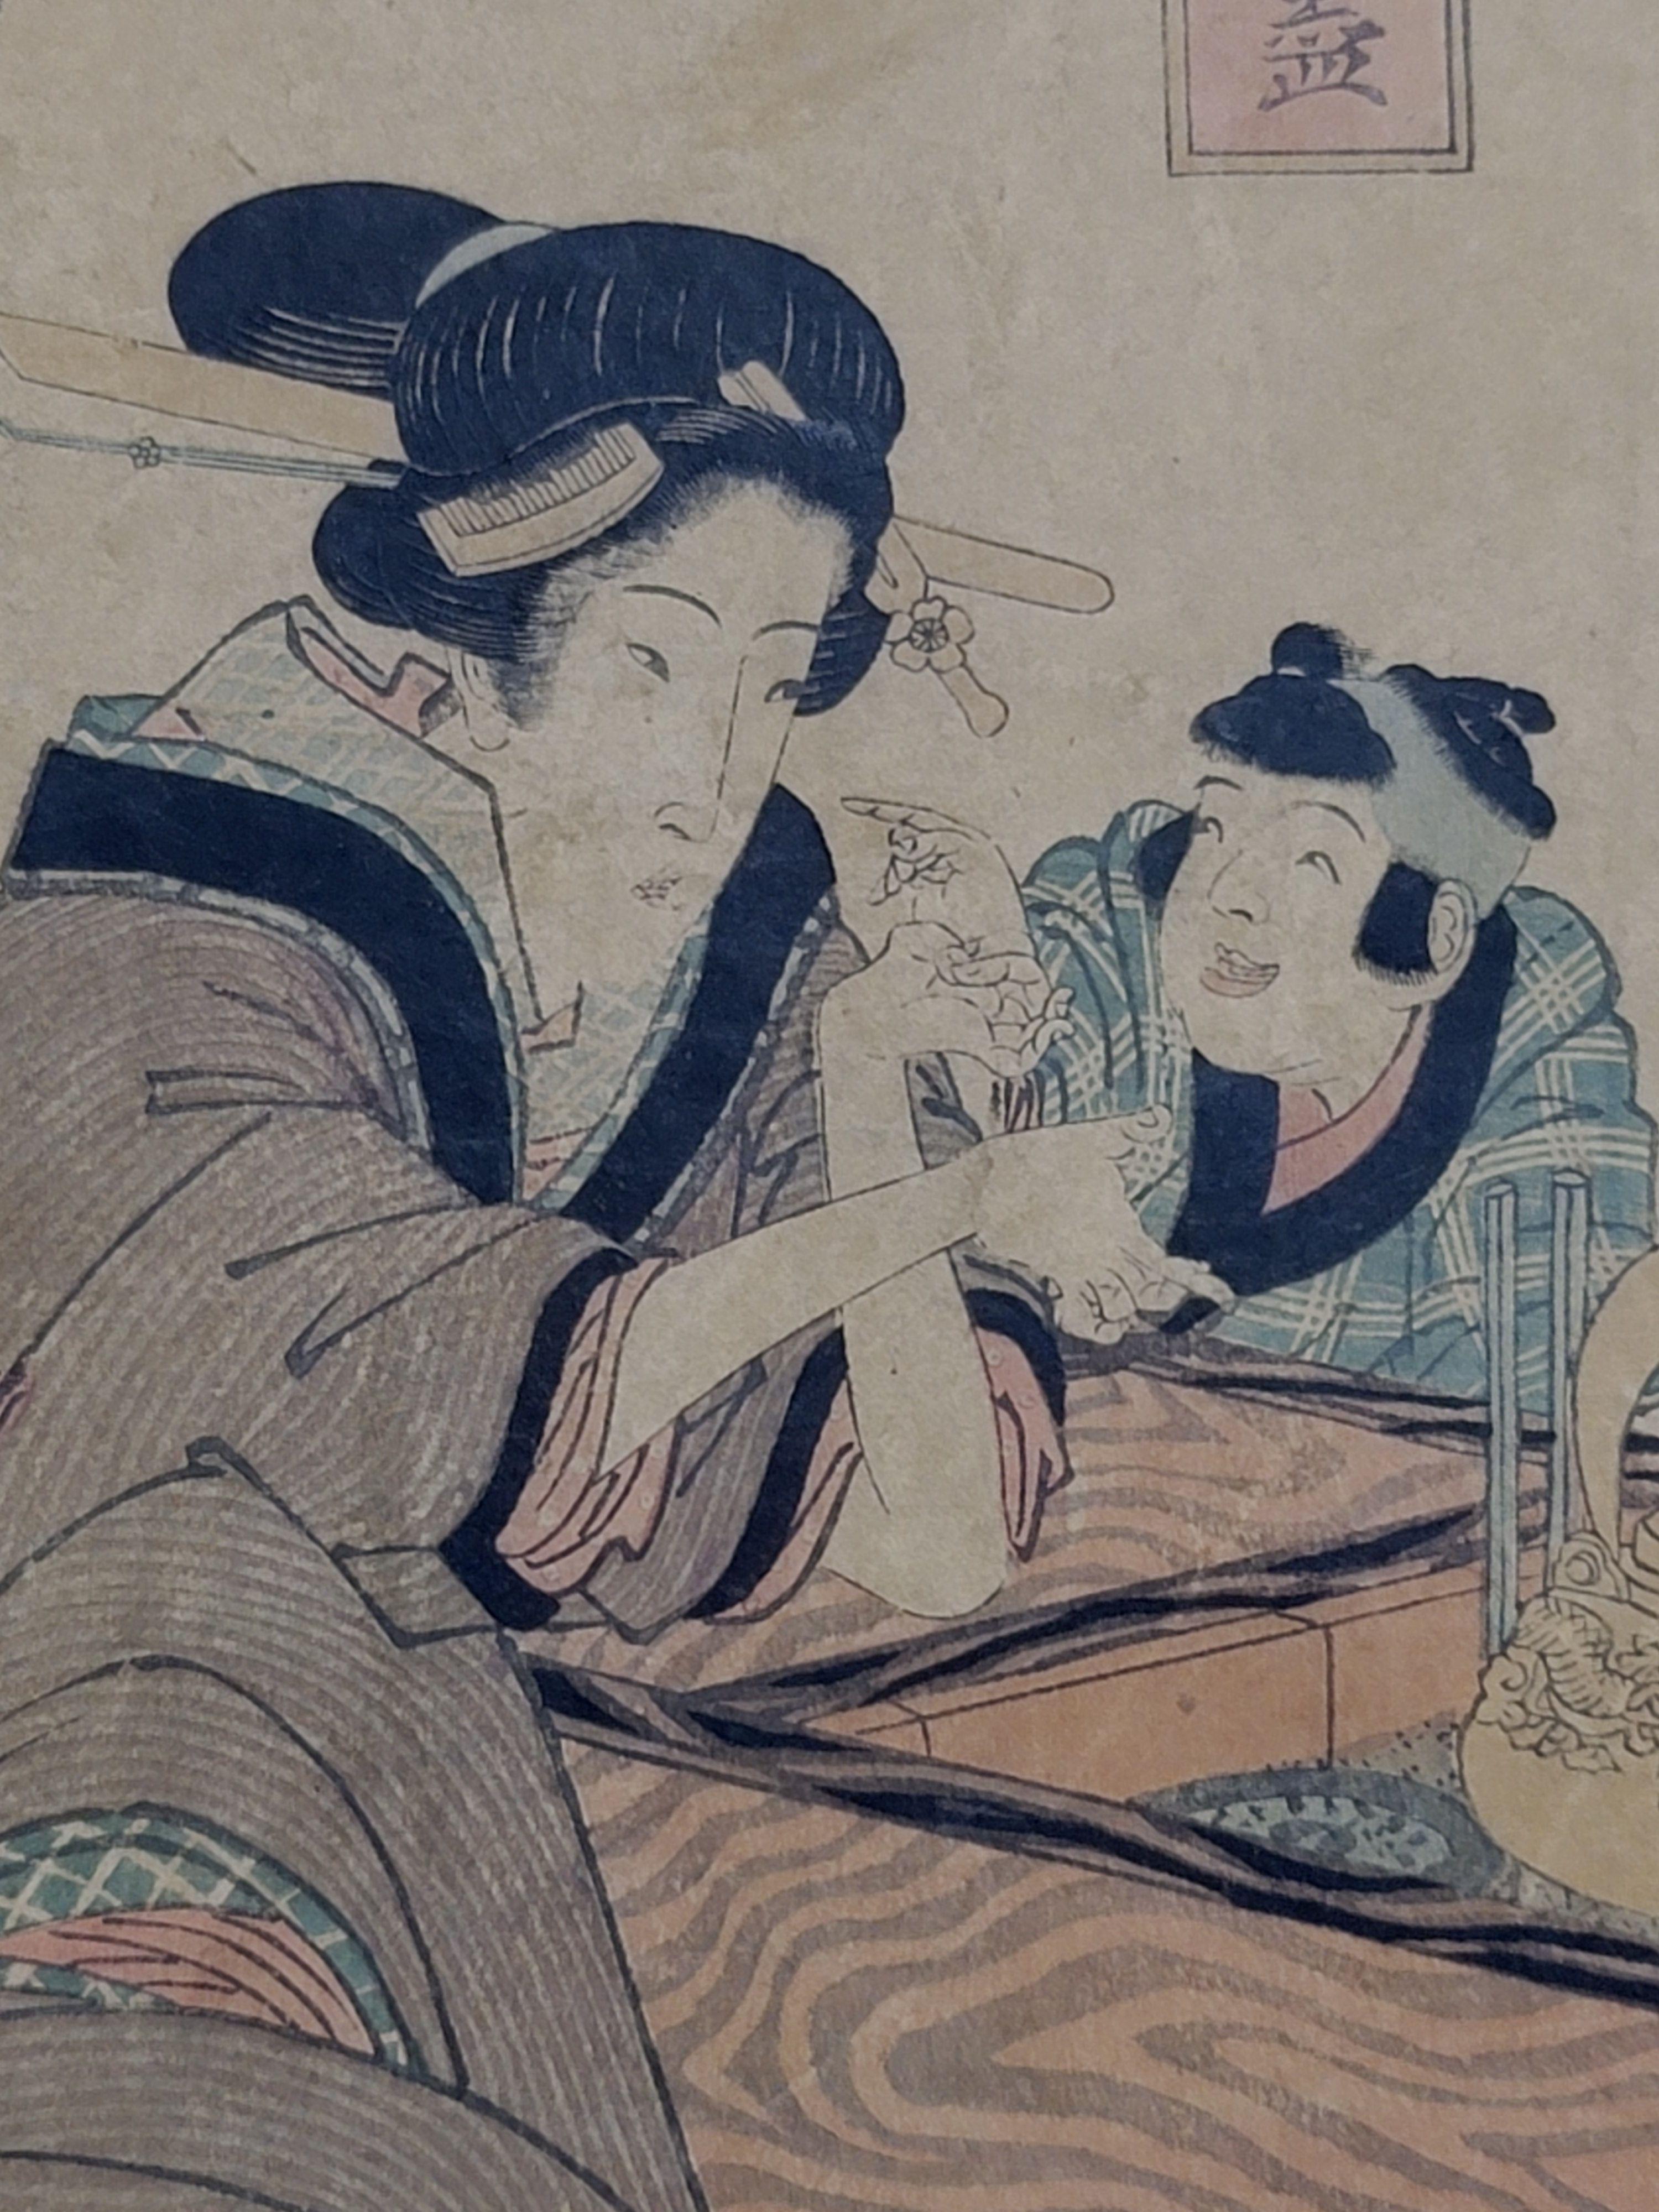 Hand-Carved Japanese Woodblock Print by Keisai Eisen 渓斎 英泉 For Sale